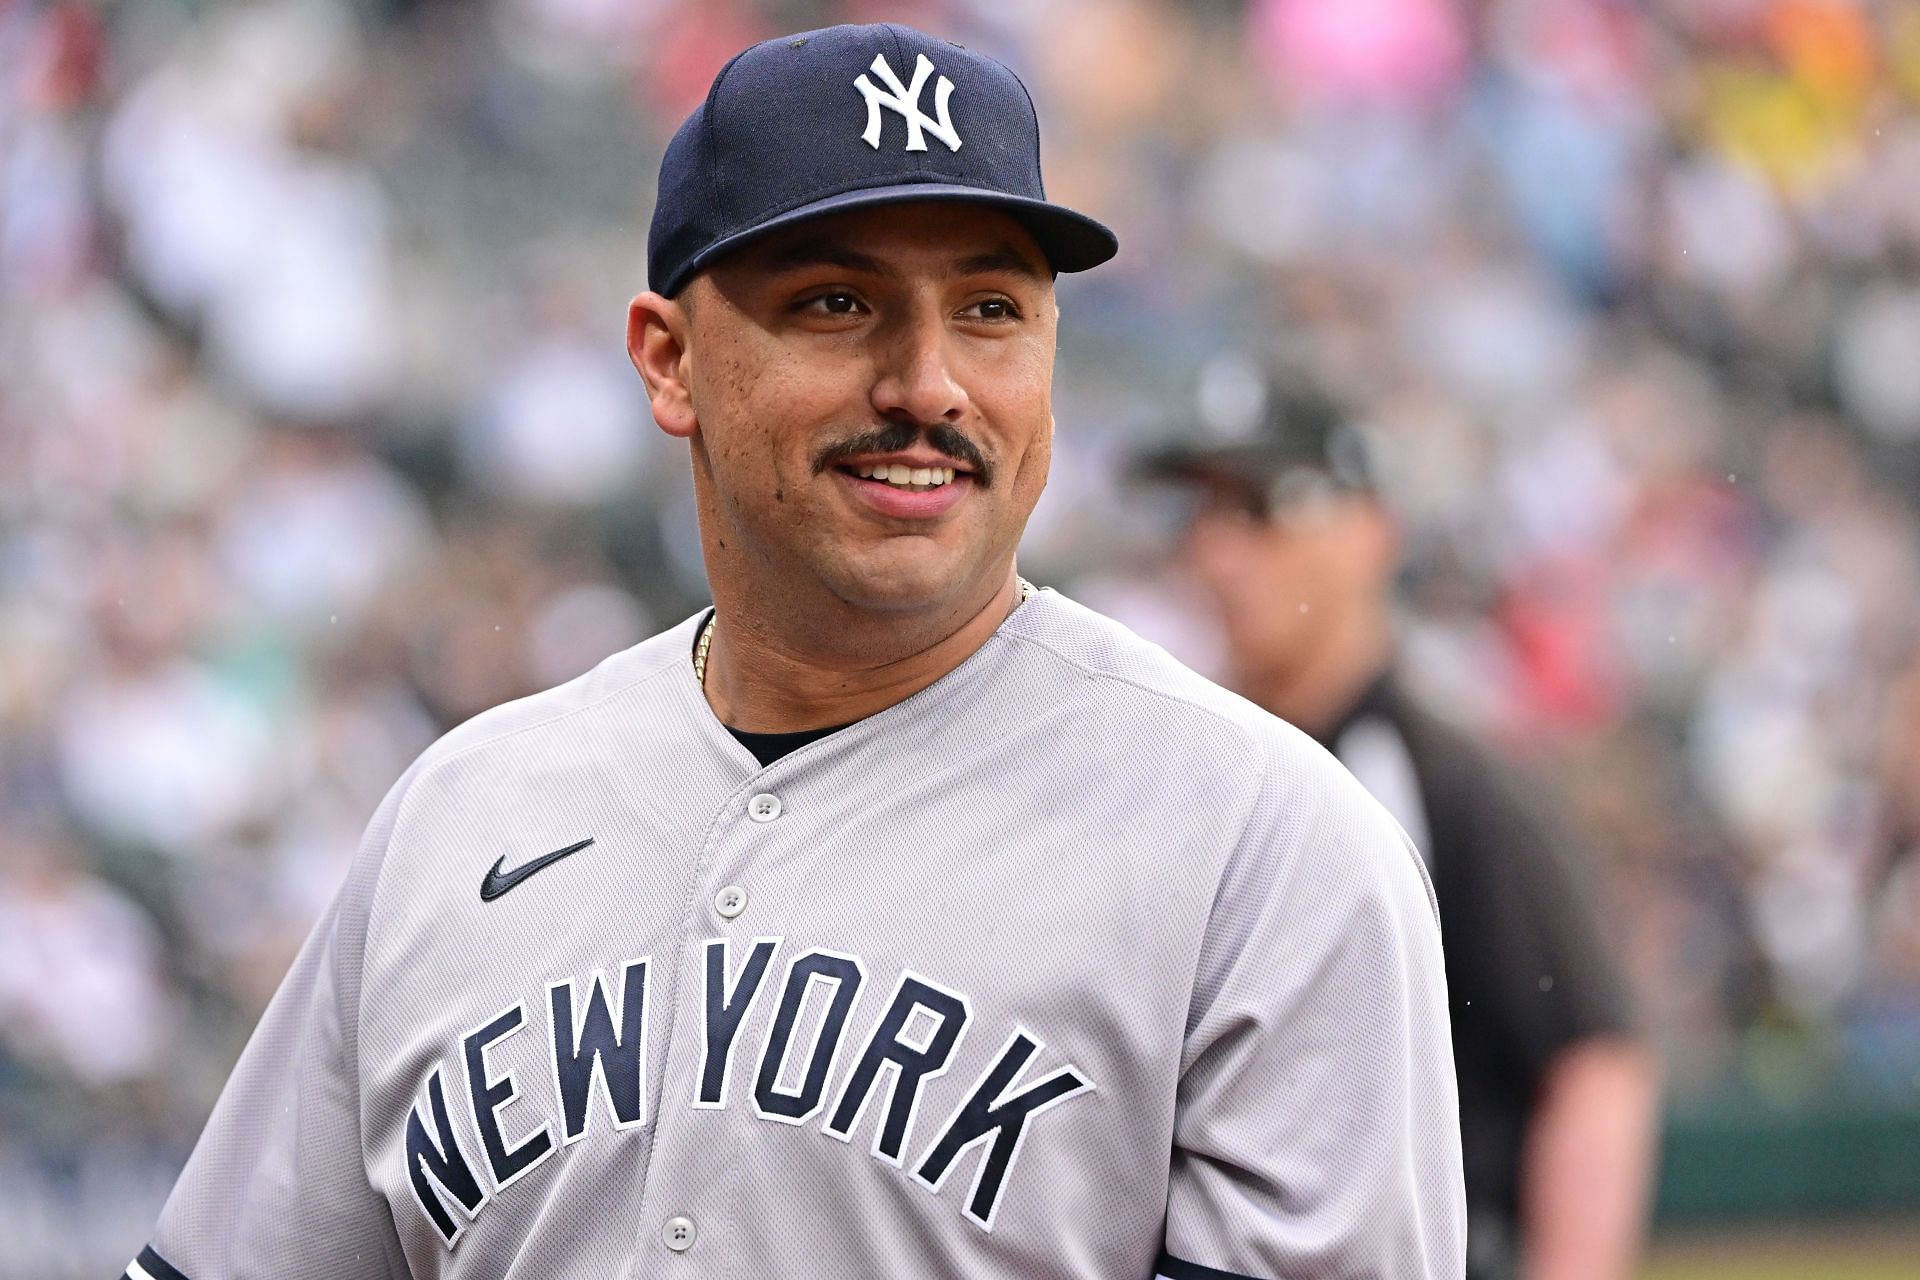 MLB fans full of praise for Nestor Cortes after All-Star pitcher avoids  arbitration and returns to New York Yankees on $3.2 million deal